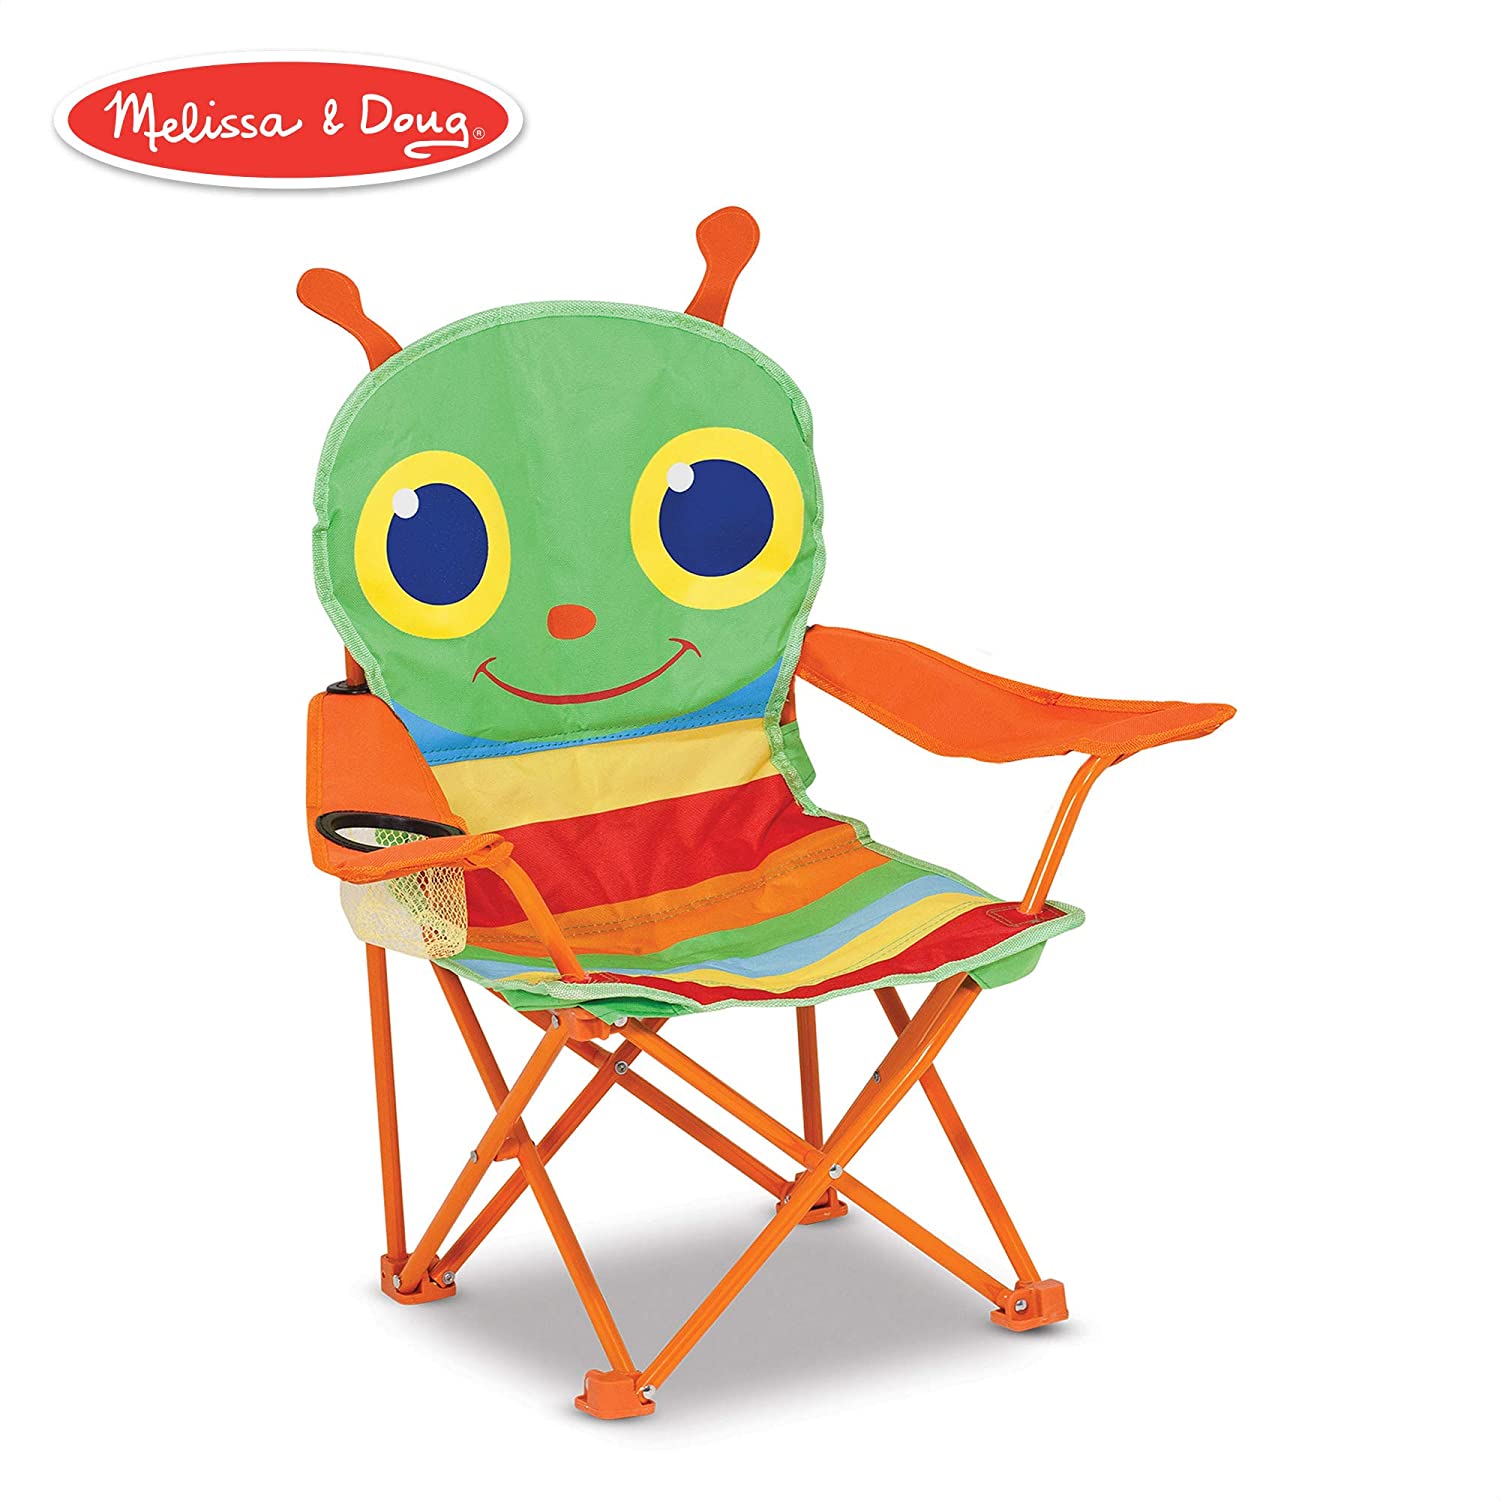 Melissa & Doug Sunny Patch Happy Giddy Child's Outdoor Chair